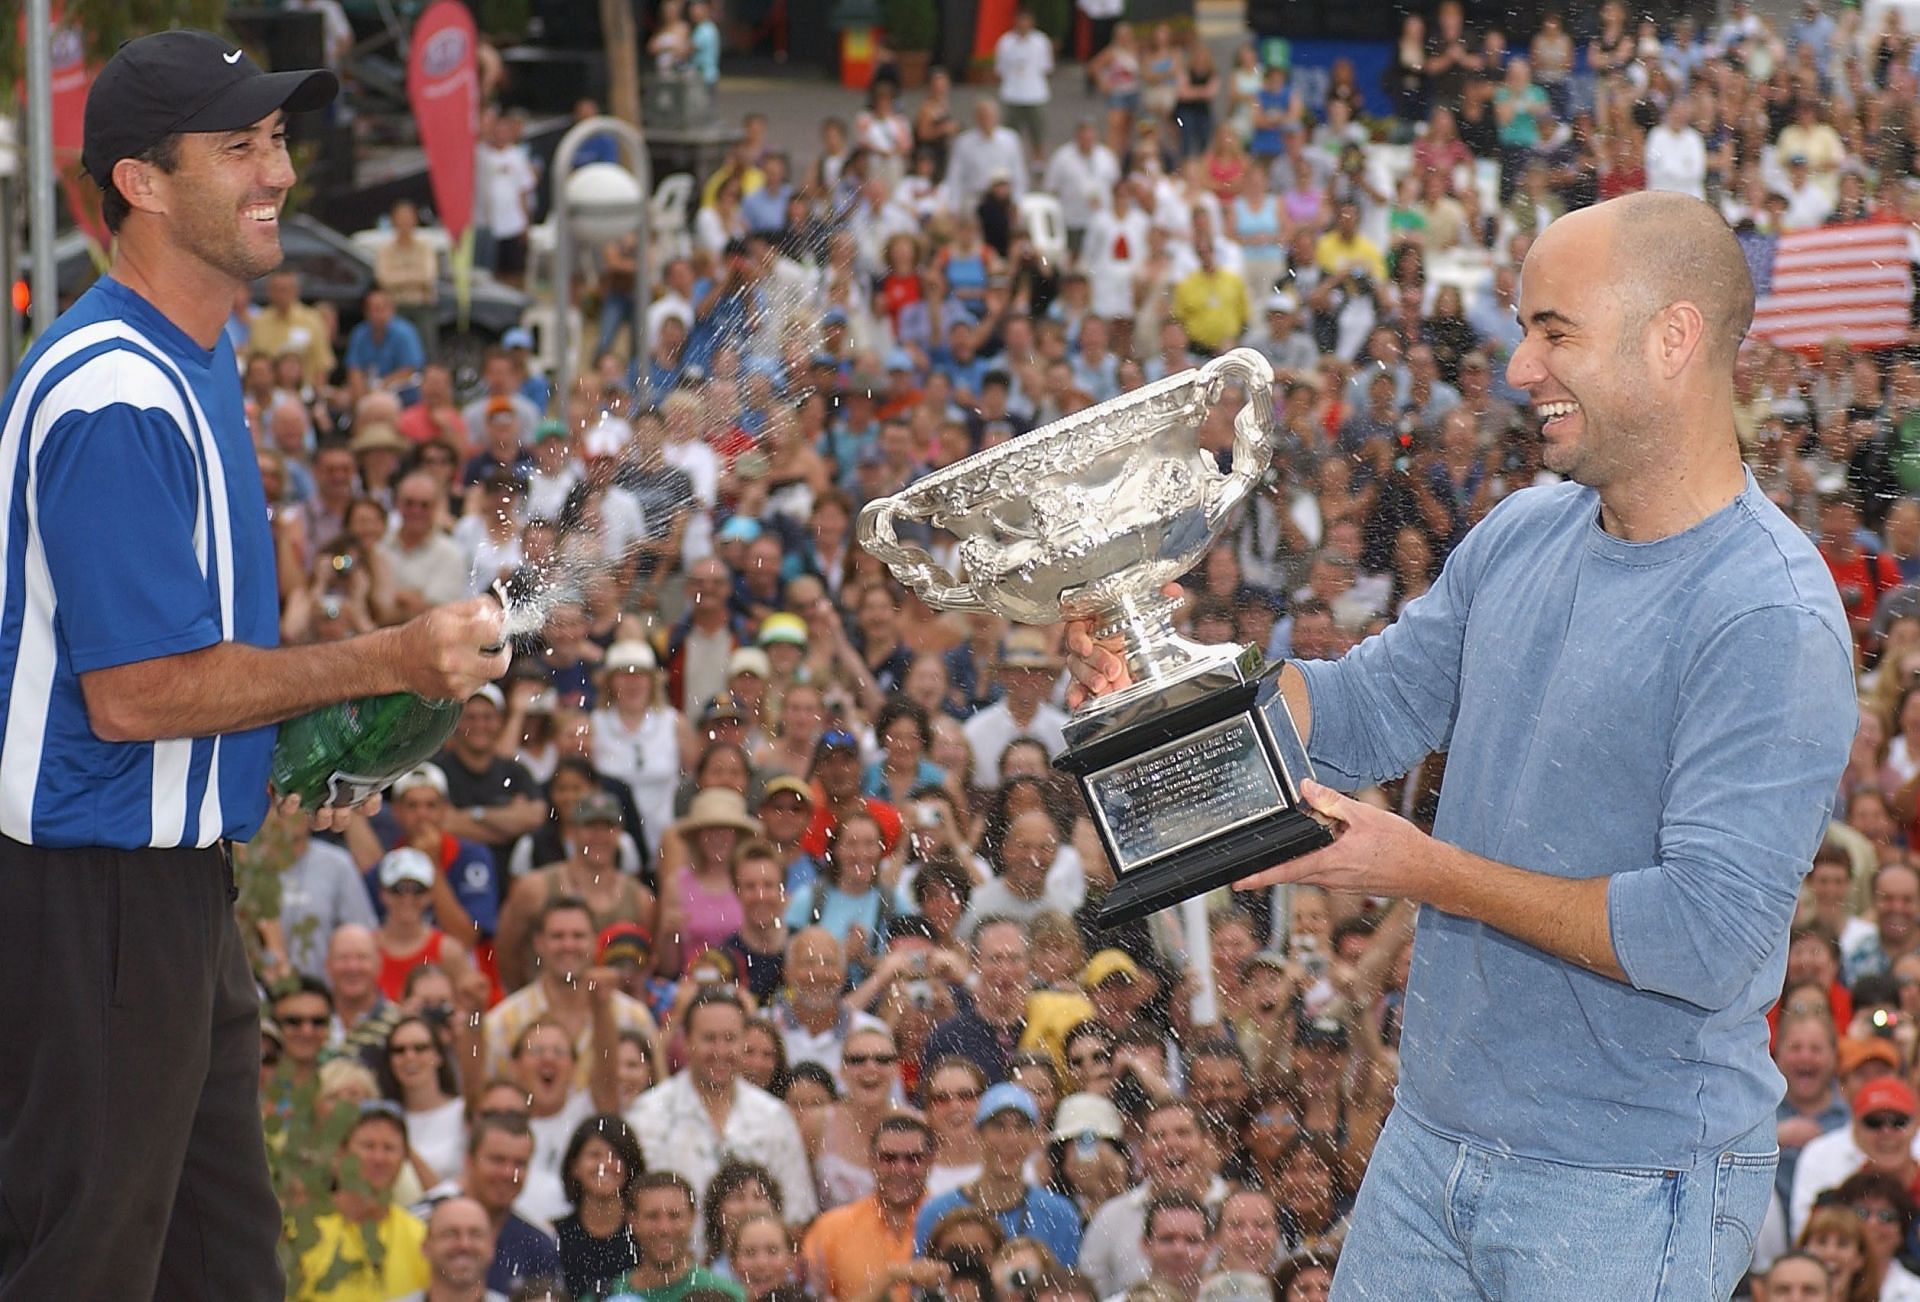 Andre Agassi after winning the 2003 Australian Open